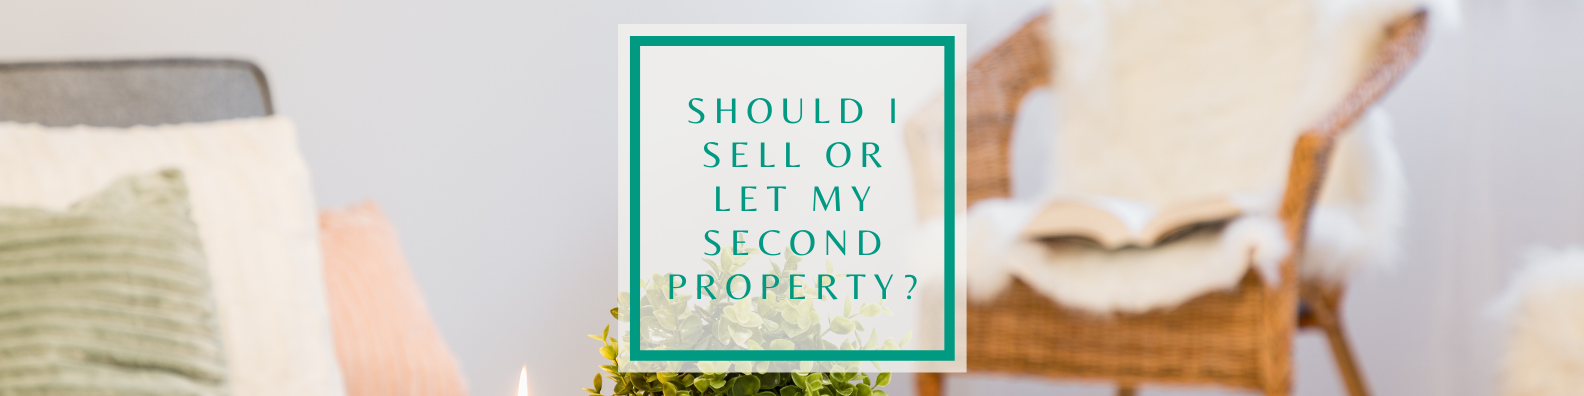 Should I Sell or Let my Second Property?